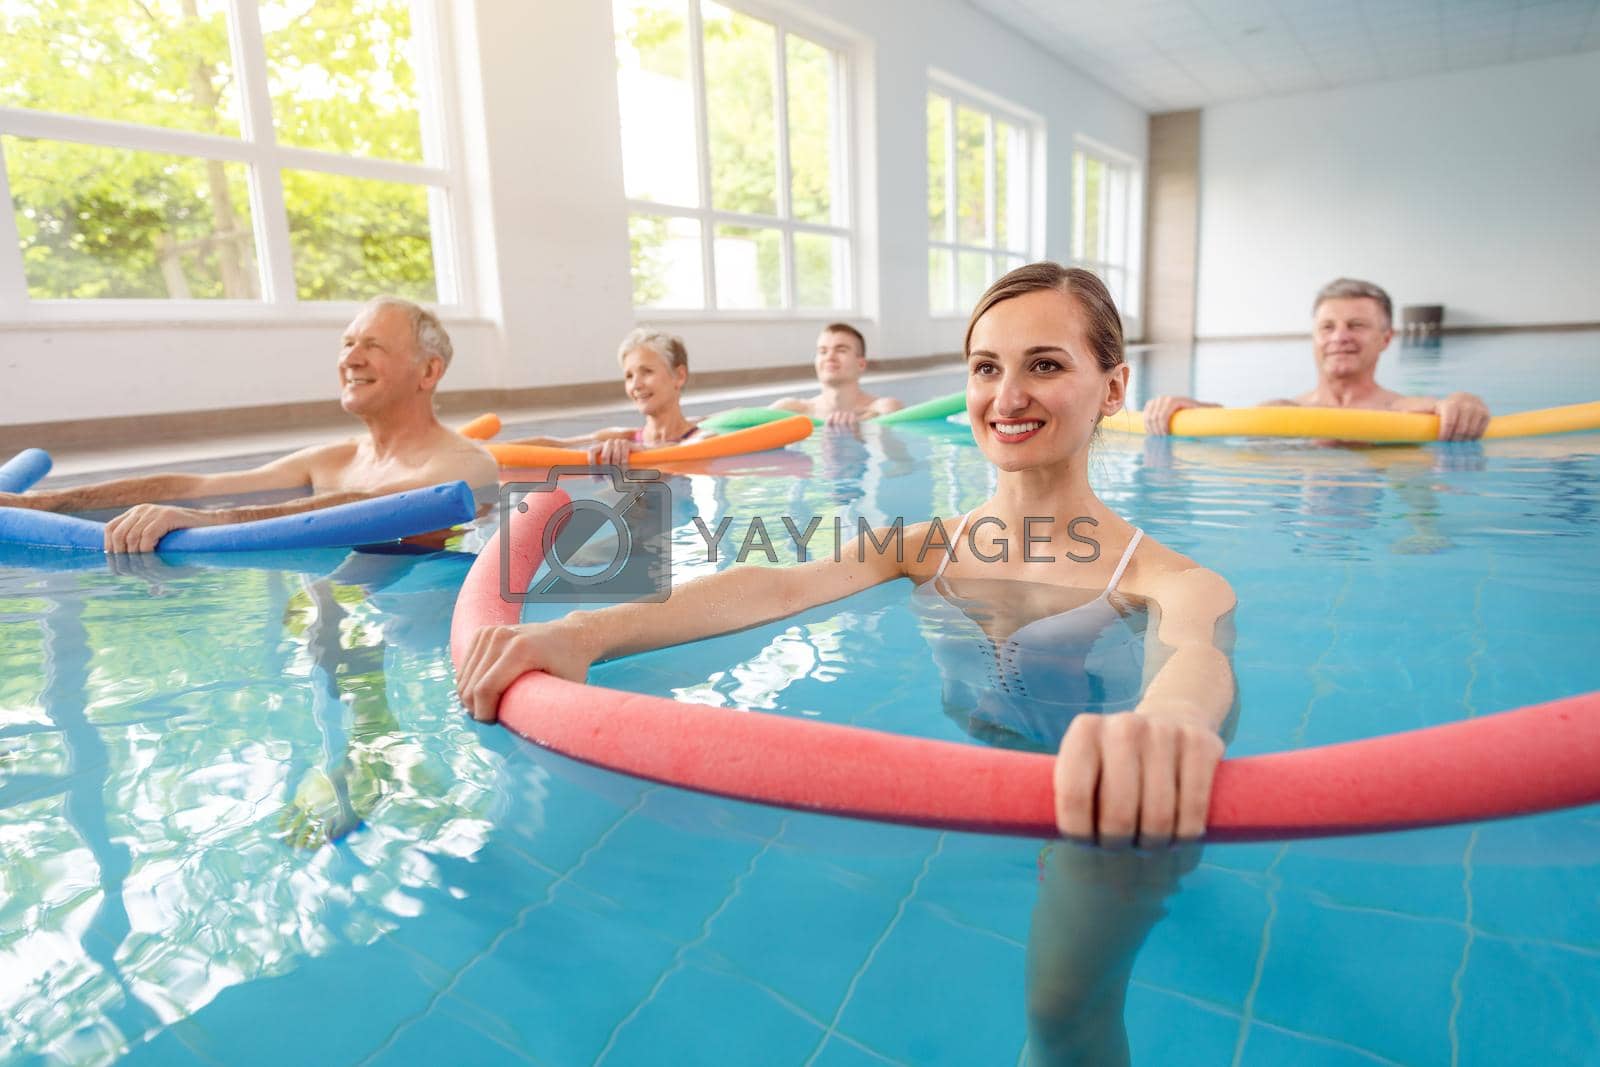 Royalty free image of Patients during remobilization in a health center doing aquarobics by Kzenon